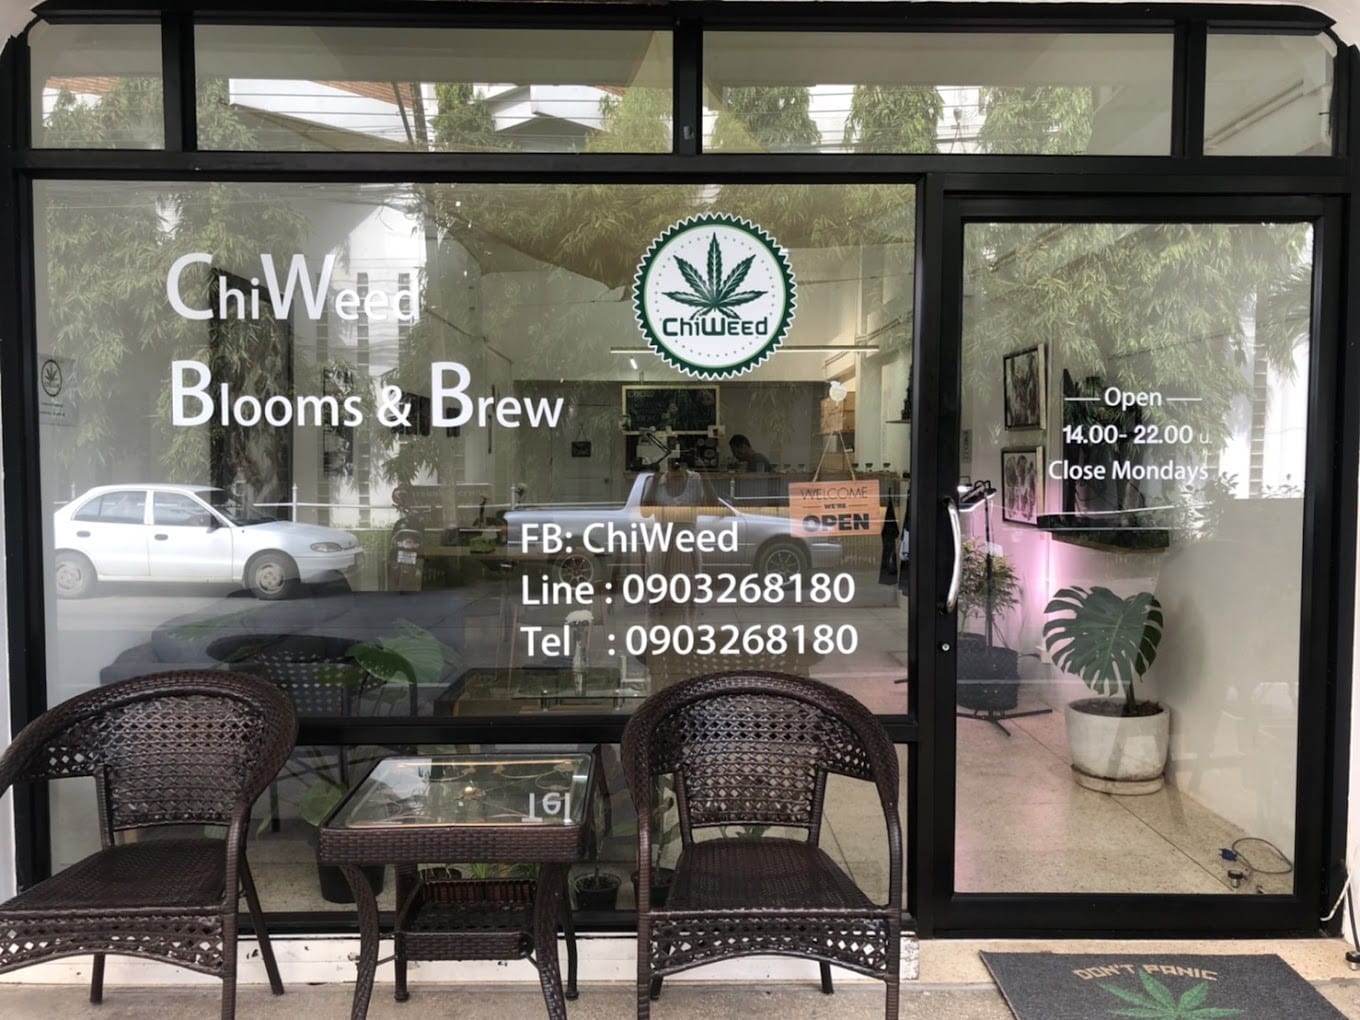 ChiWeed Cannabis Dispensary